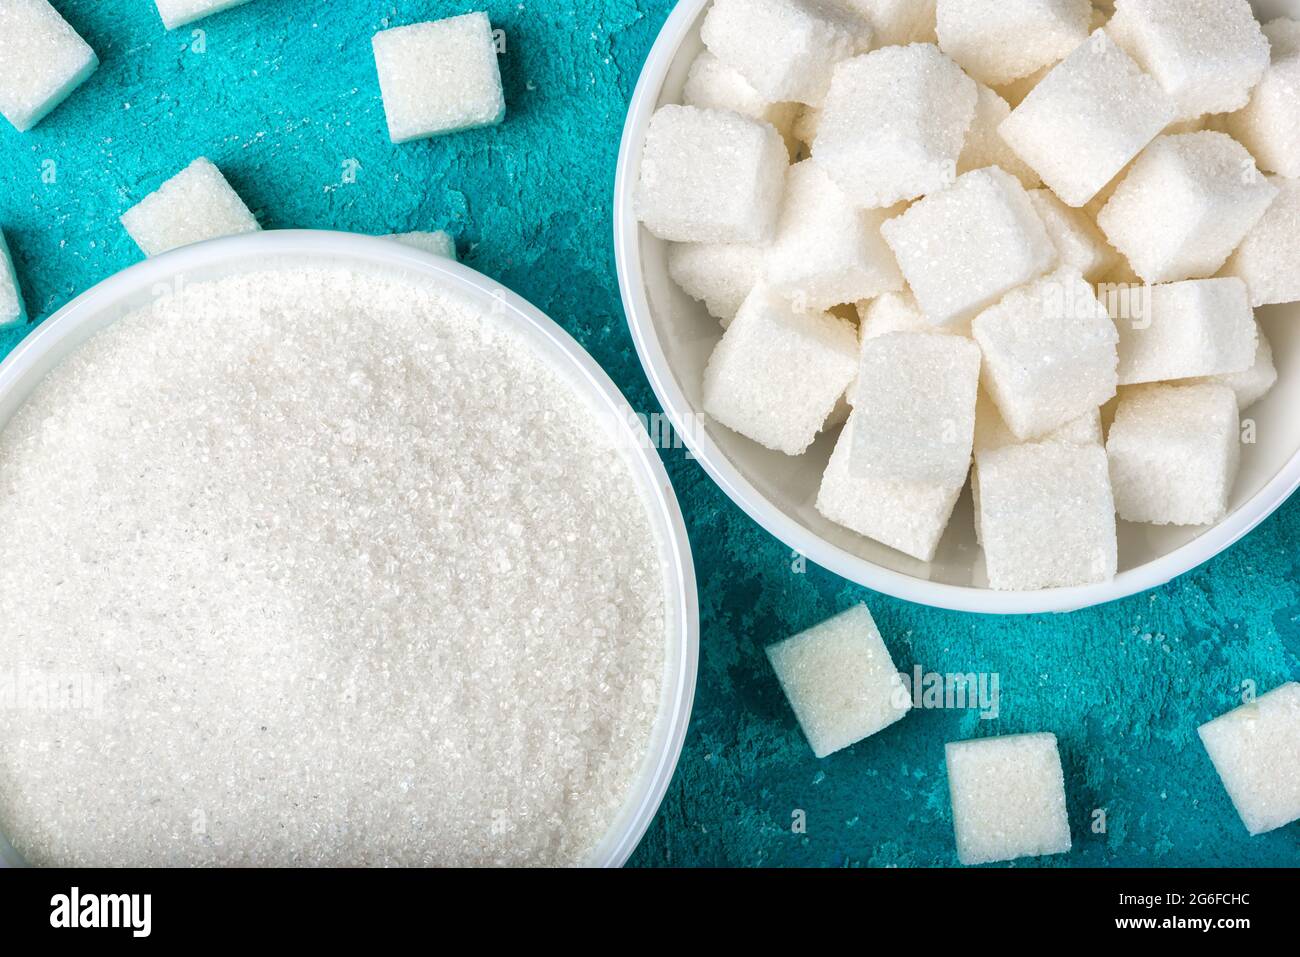 White sugar in bowls on blue textured background. Stock Photo